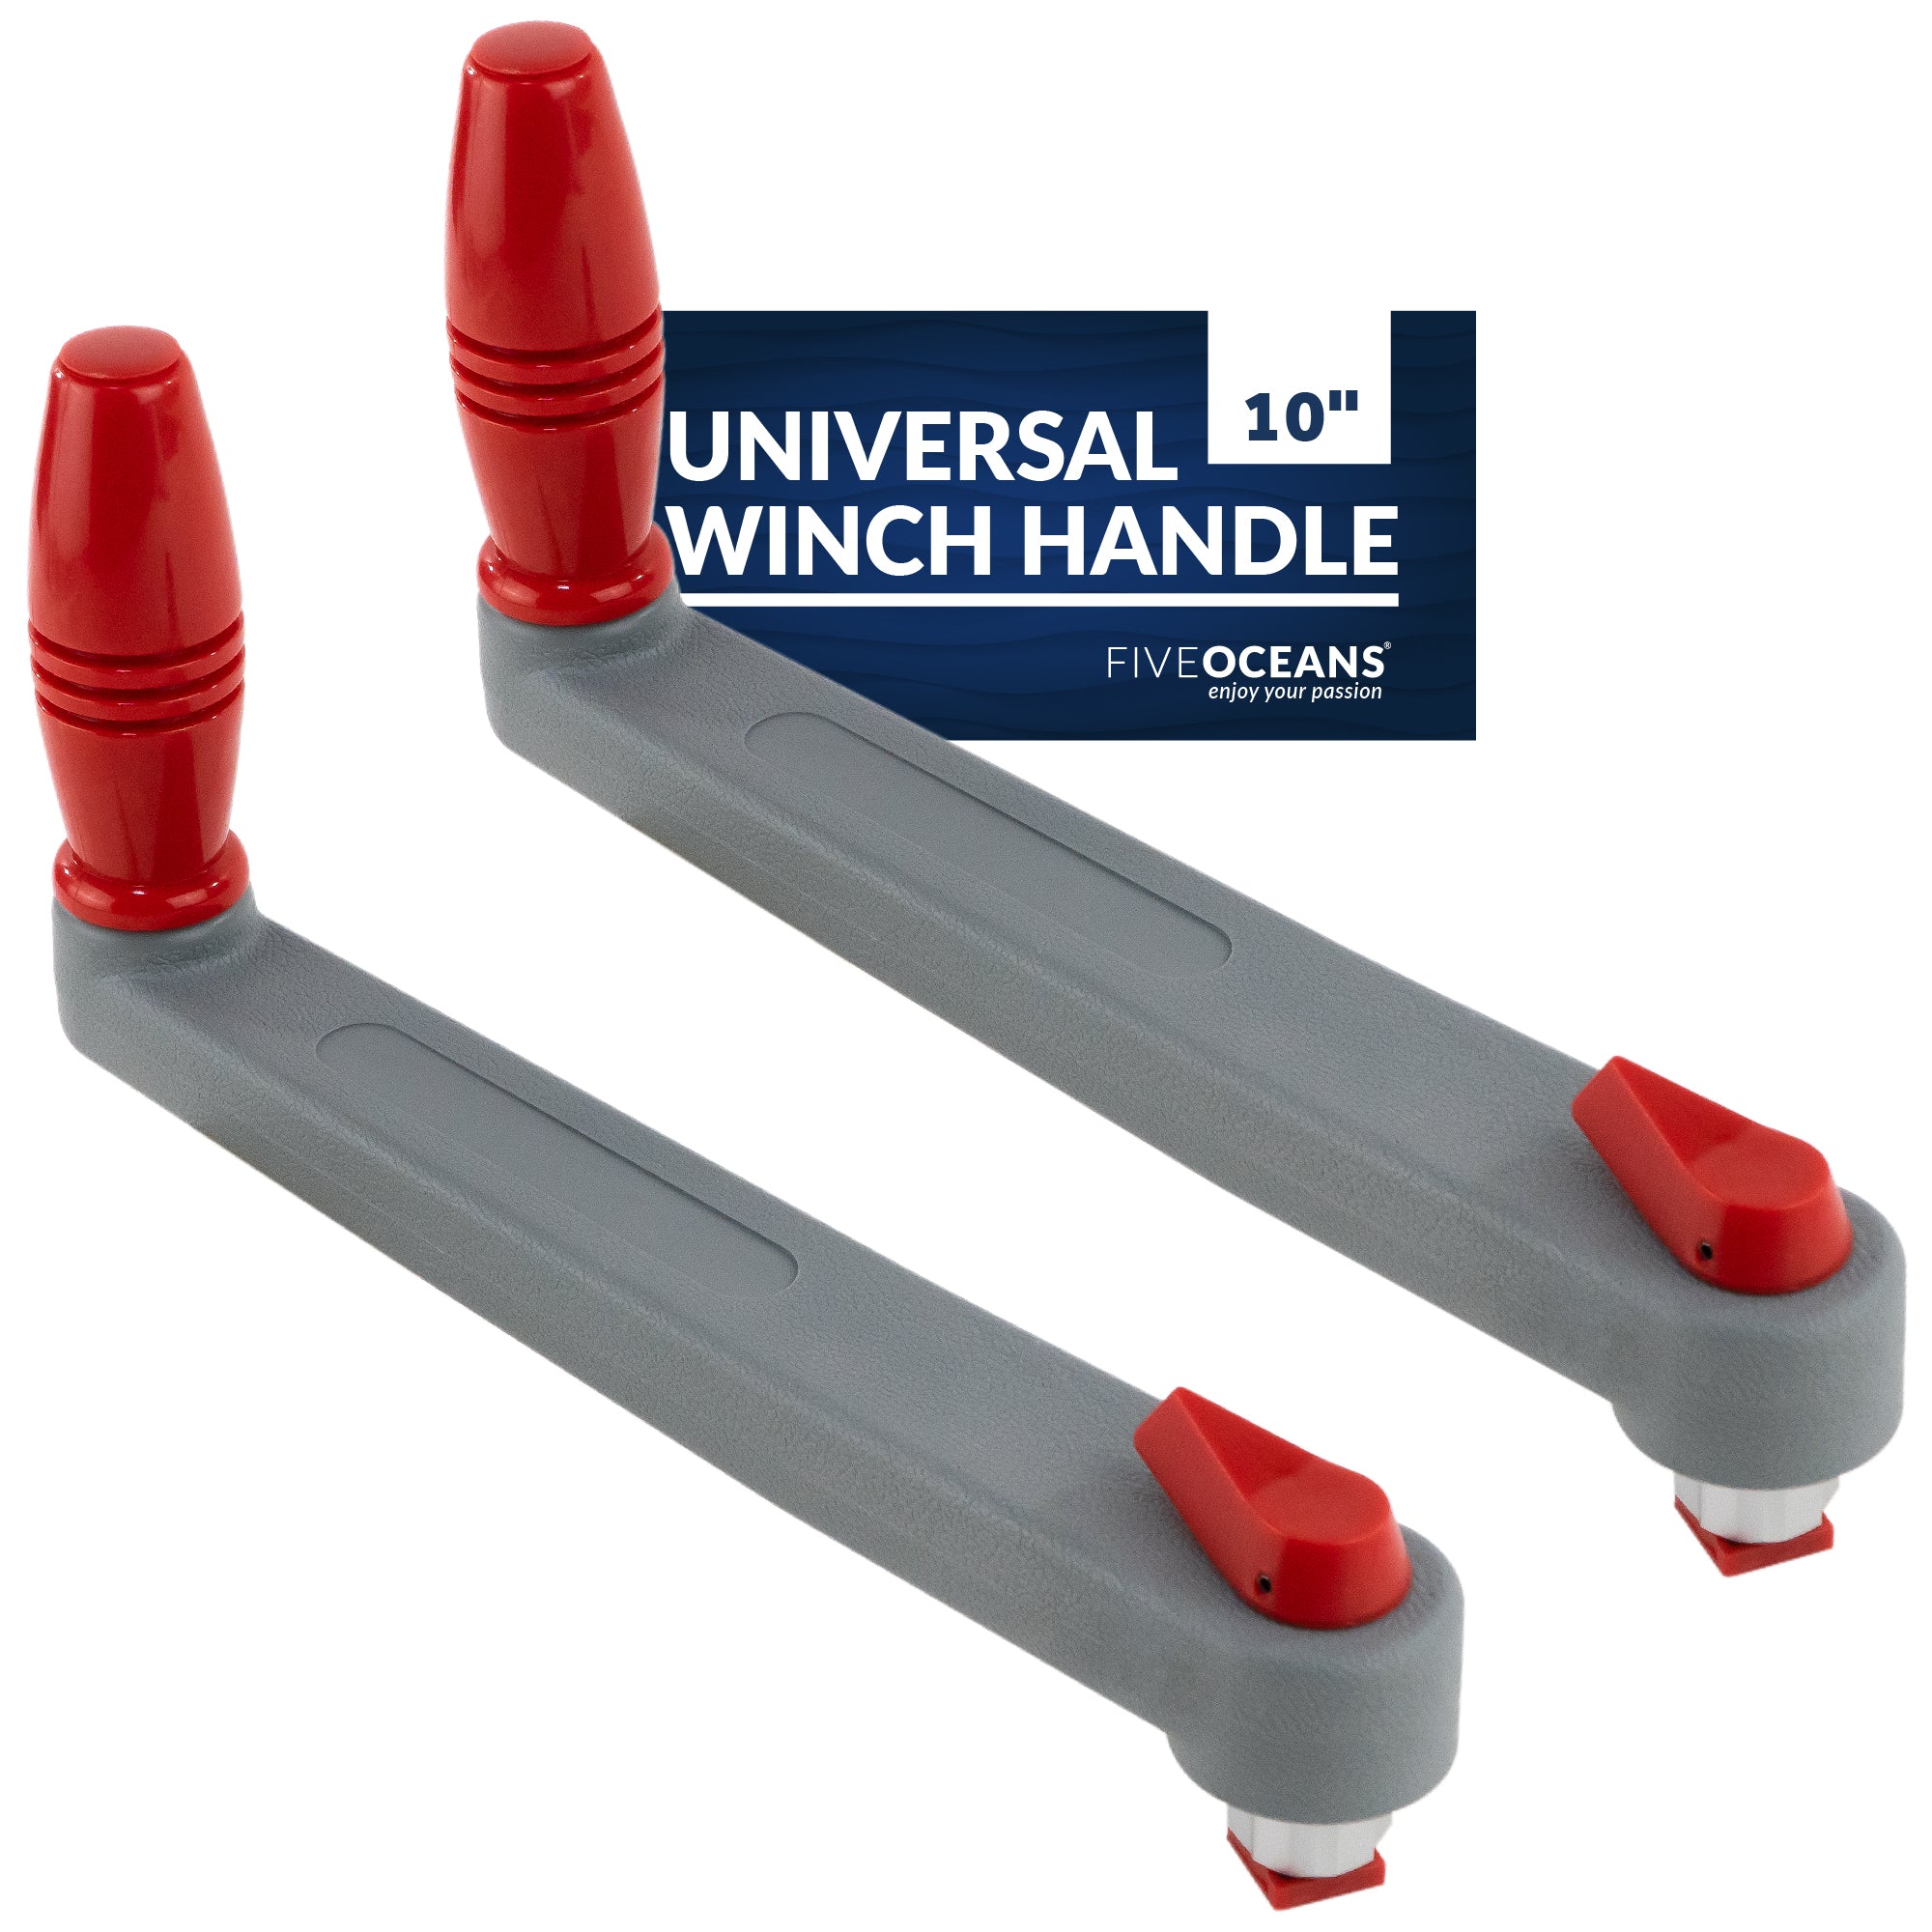 Universal Winch Handle, 10" Floating Lock-in Style, Grey/Red, 2-Pack - FO3924-M2